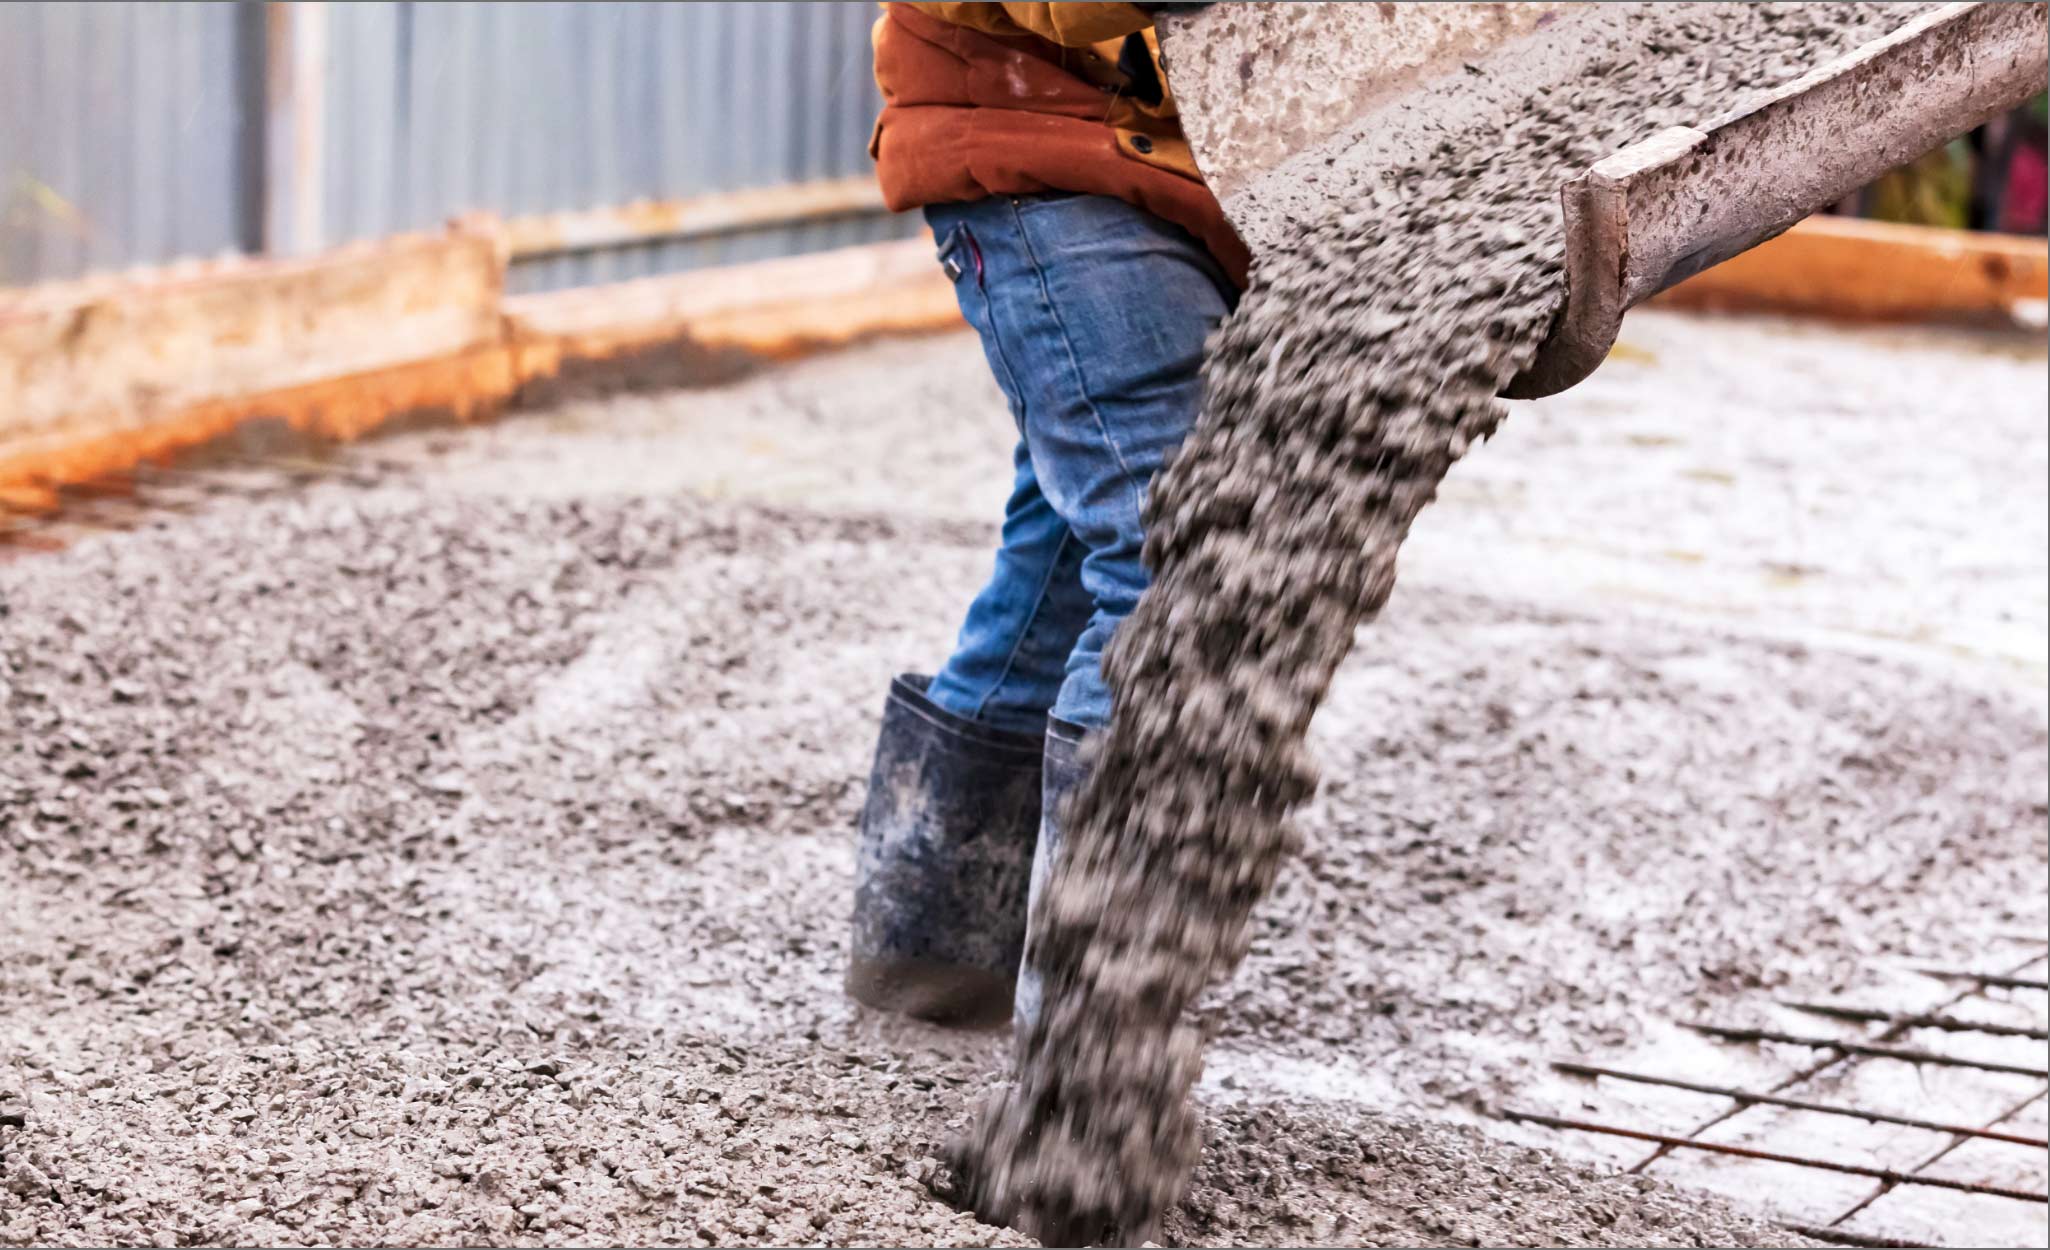 Wet cement pours from a cement mixer chute.